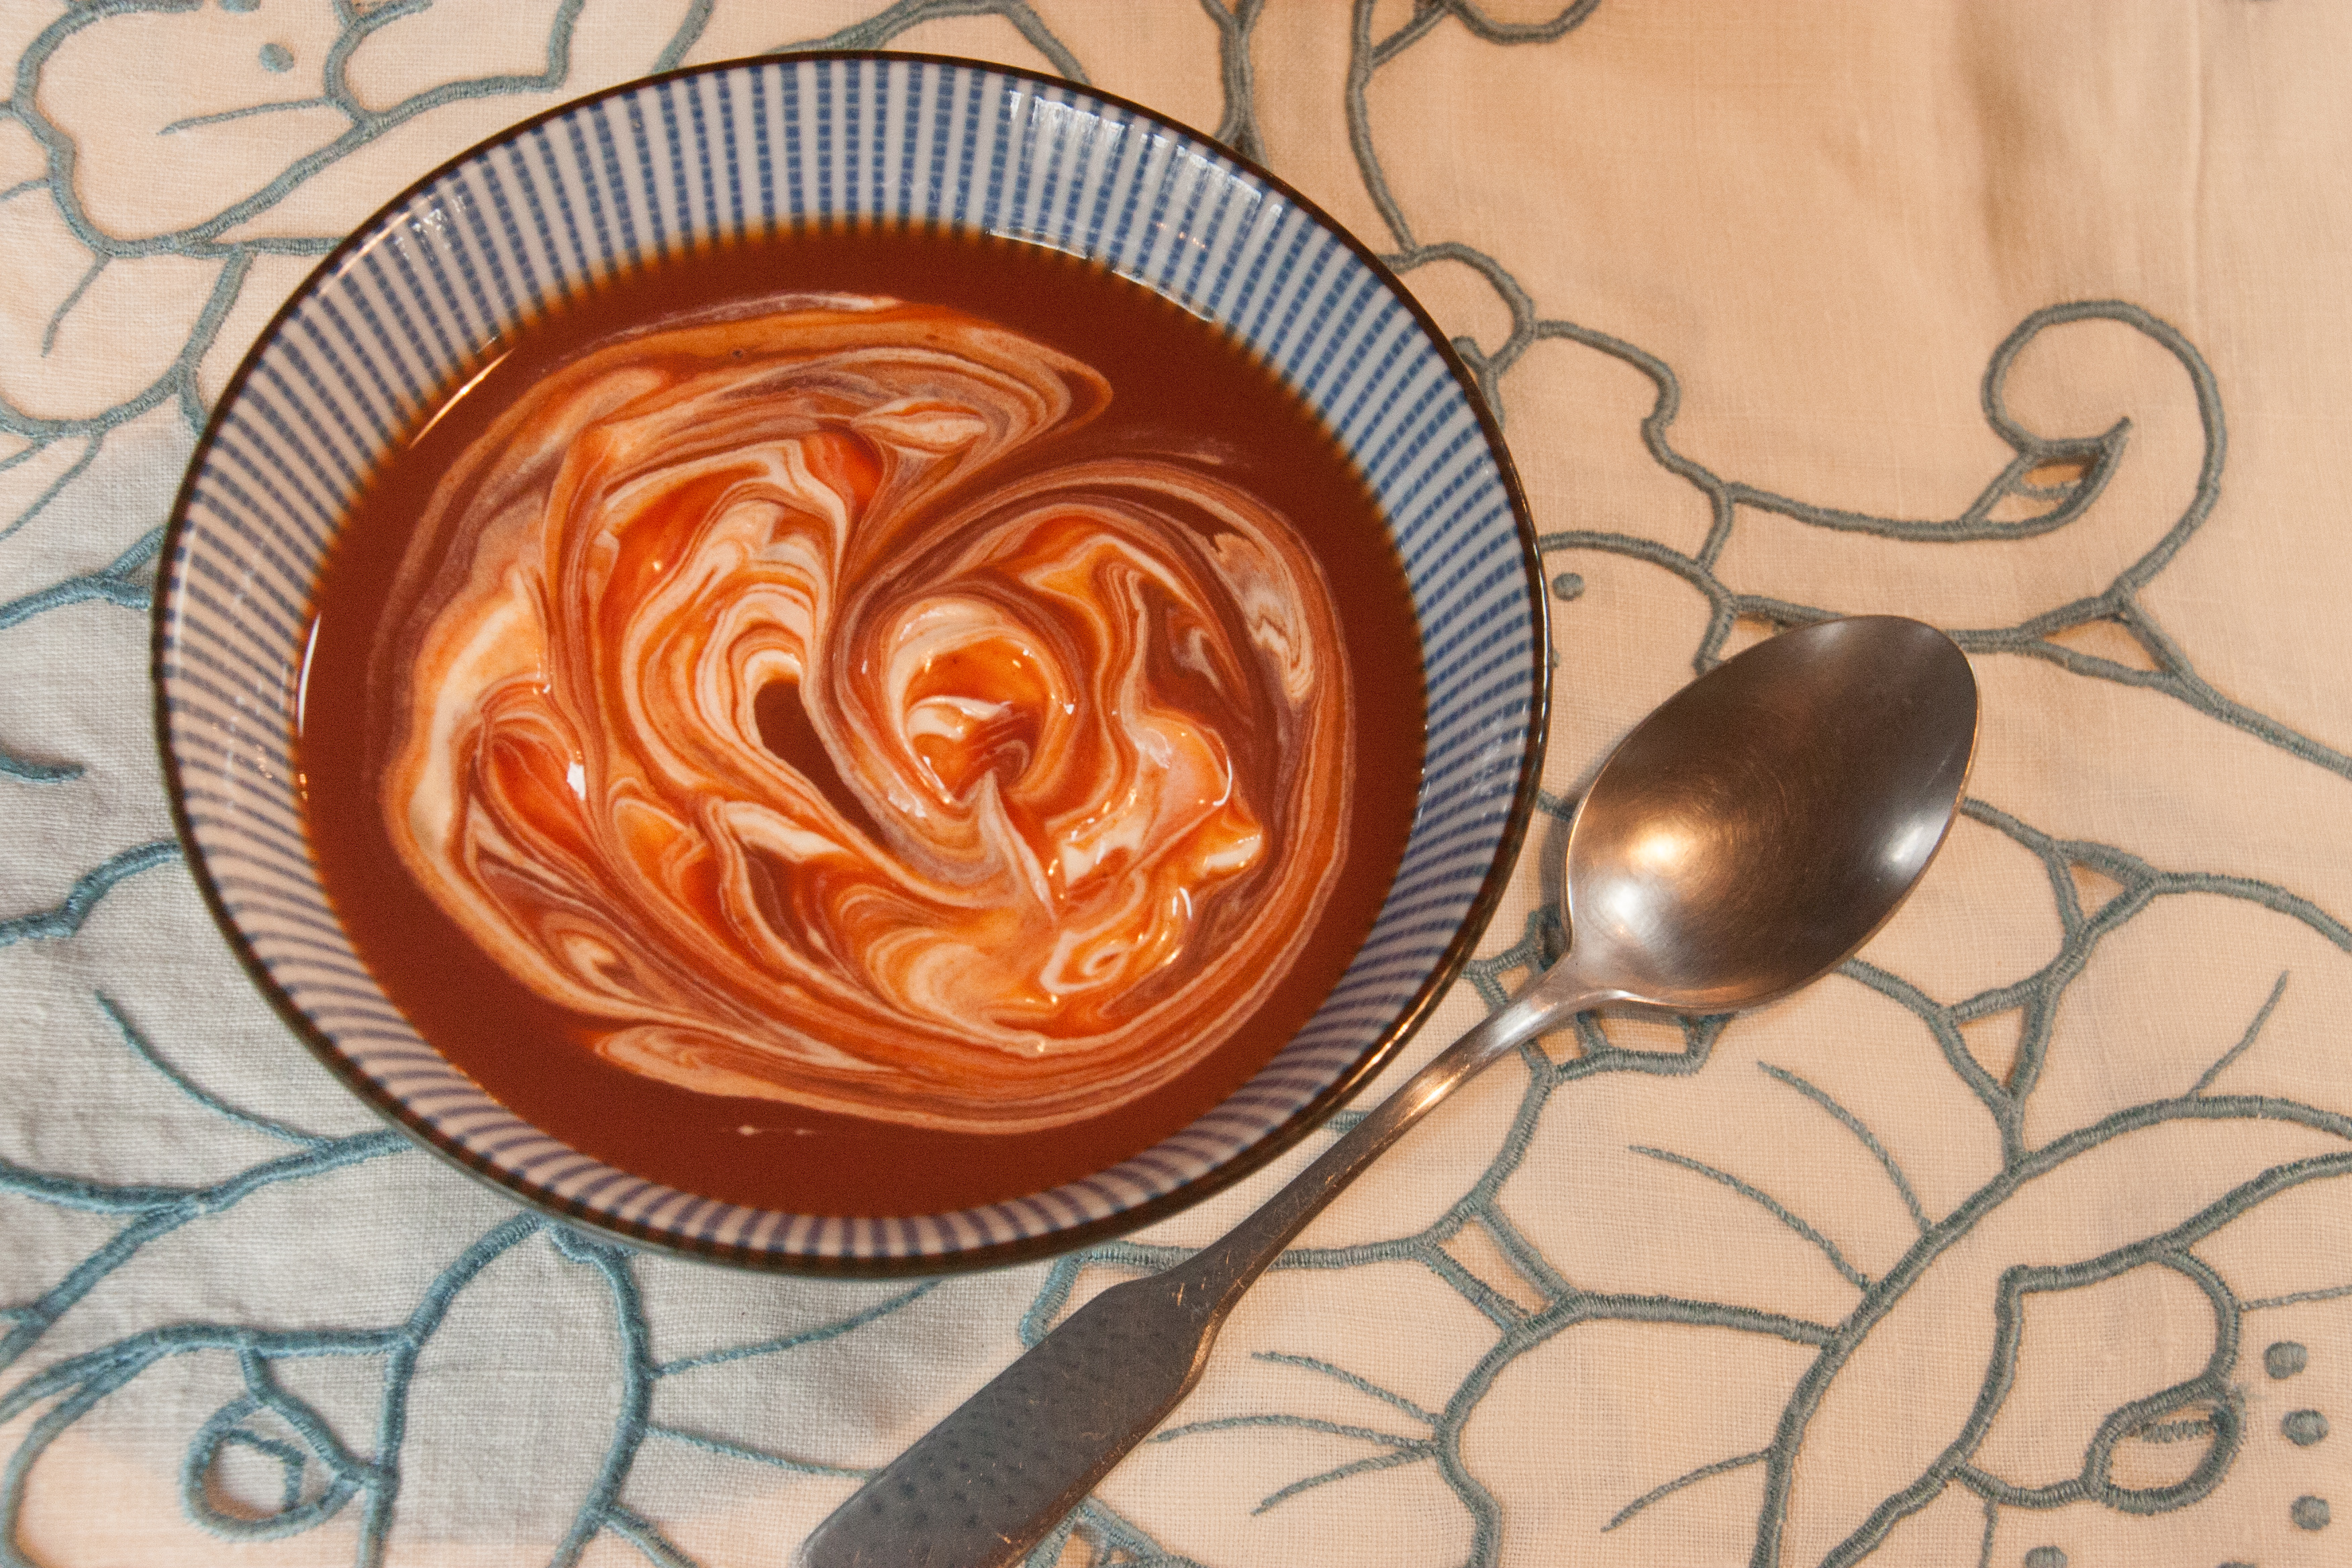 Rose Hip Soup Recipe (the Swedes call it Nyponsoppa)